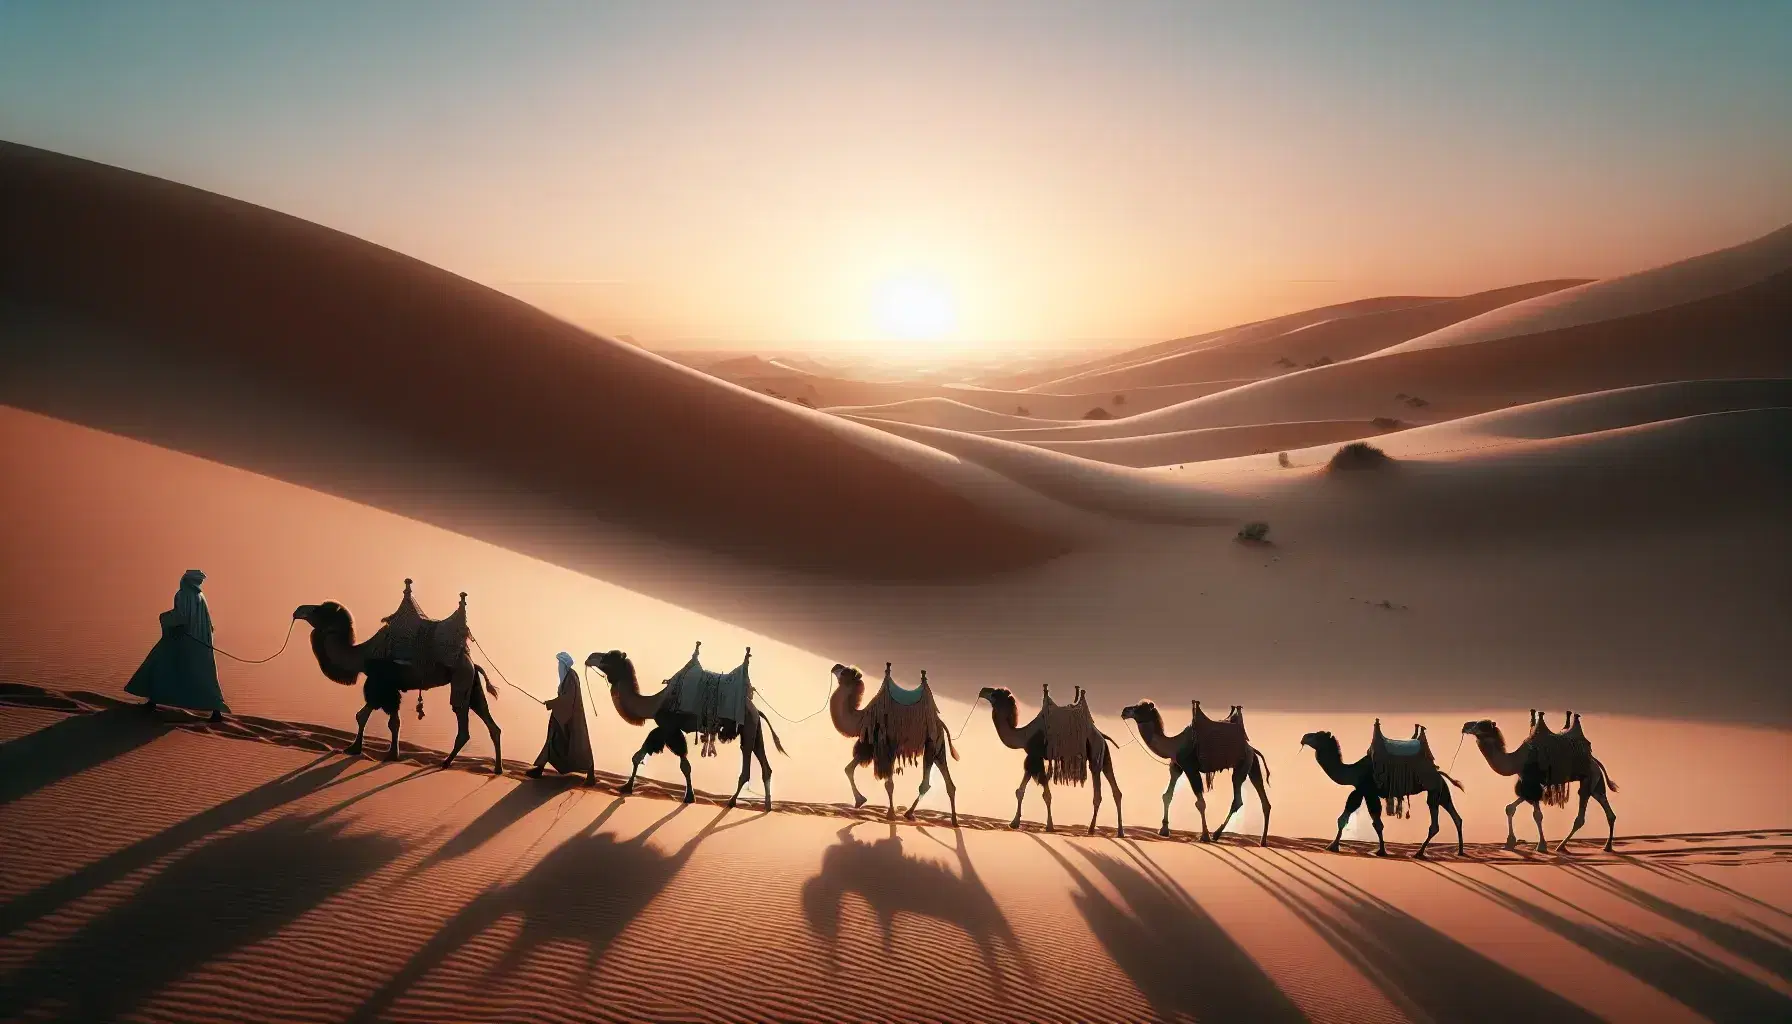 Serene desert dawn with a camel caravan silhouetted against a pastel sky, traditional robed figures leading, and long shadows cast on rippled sand.